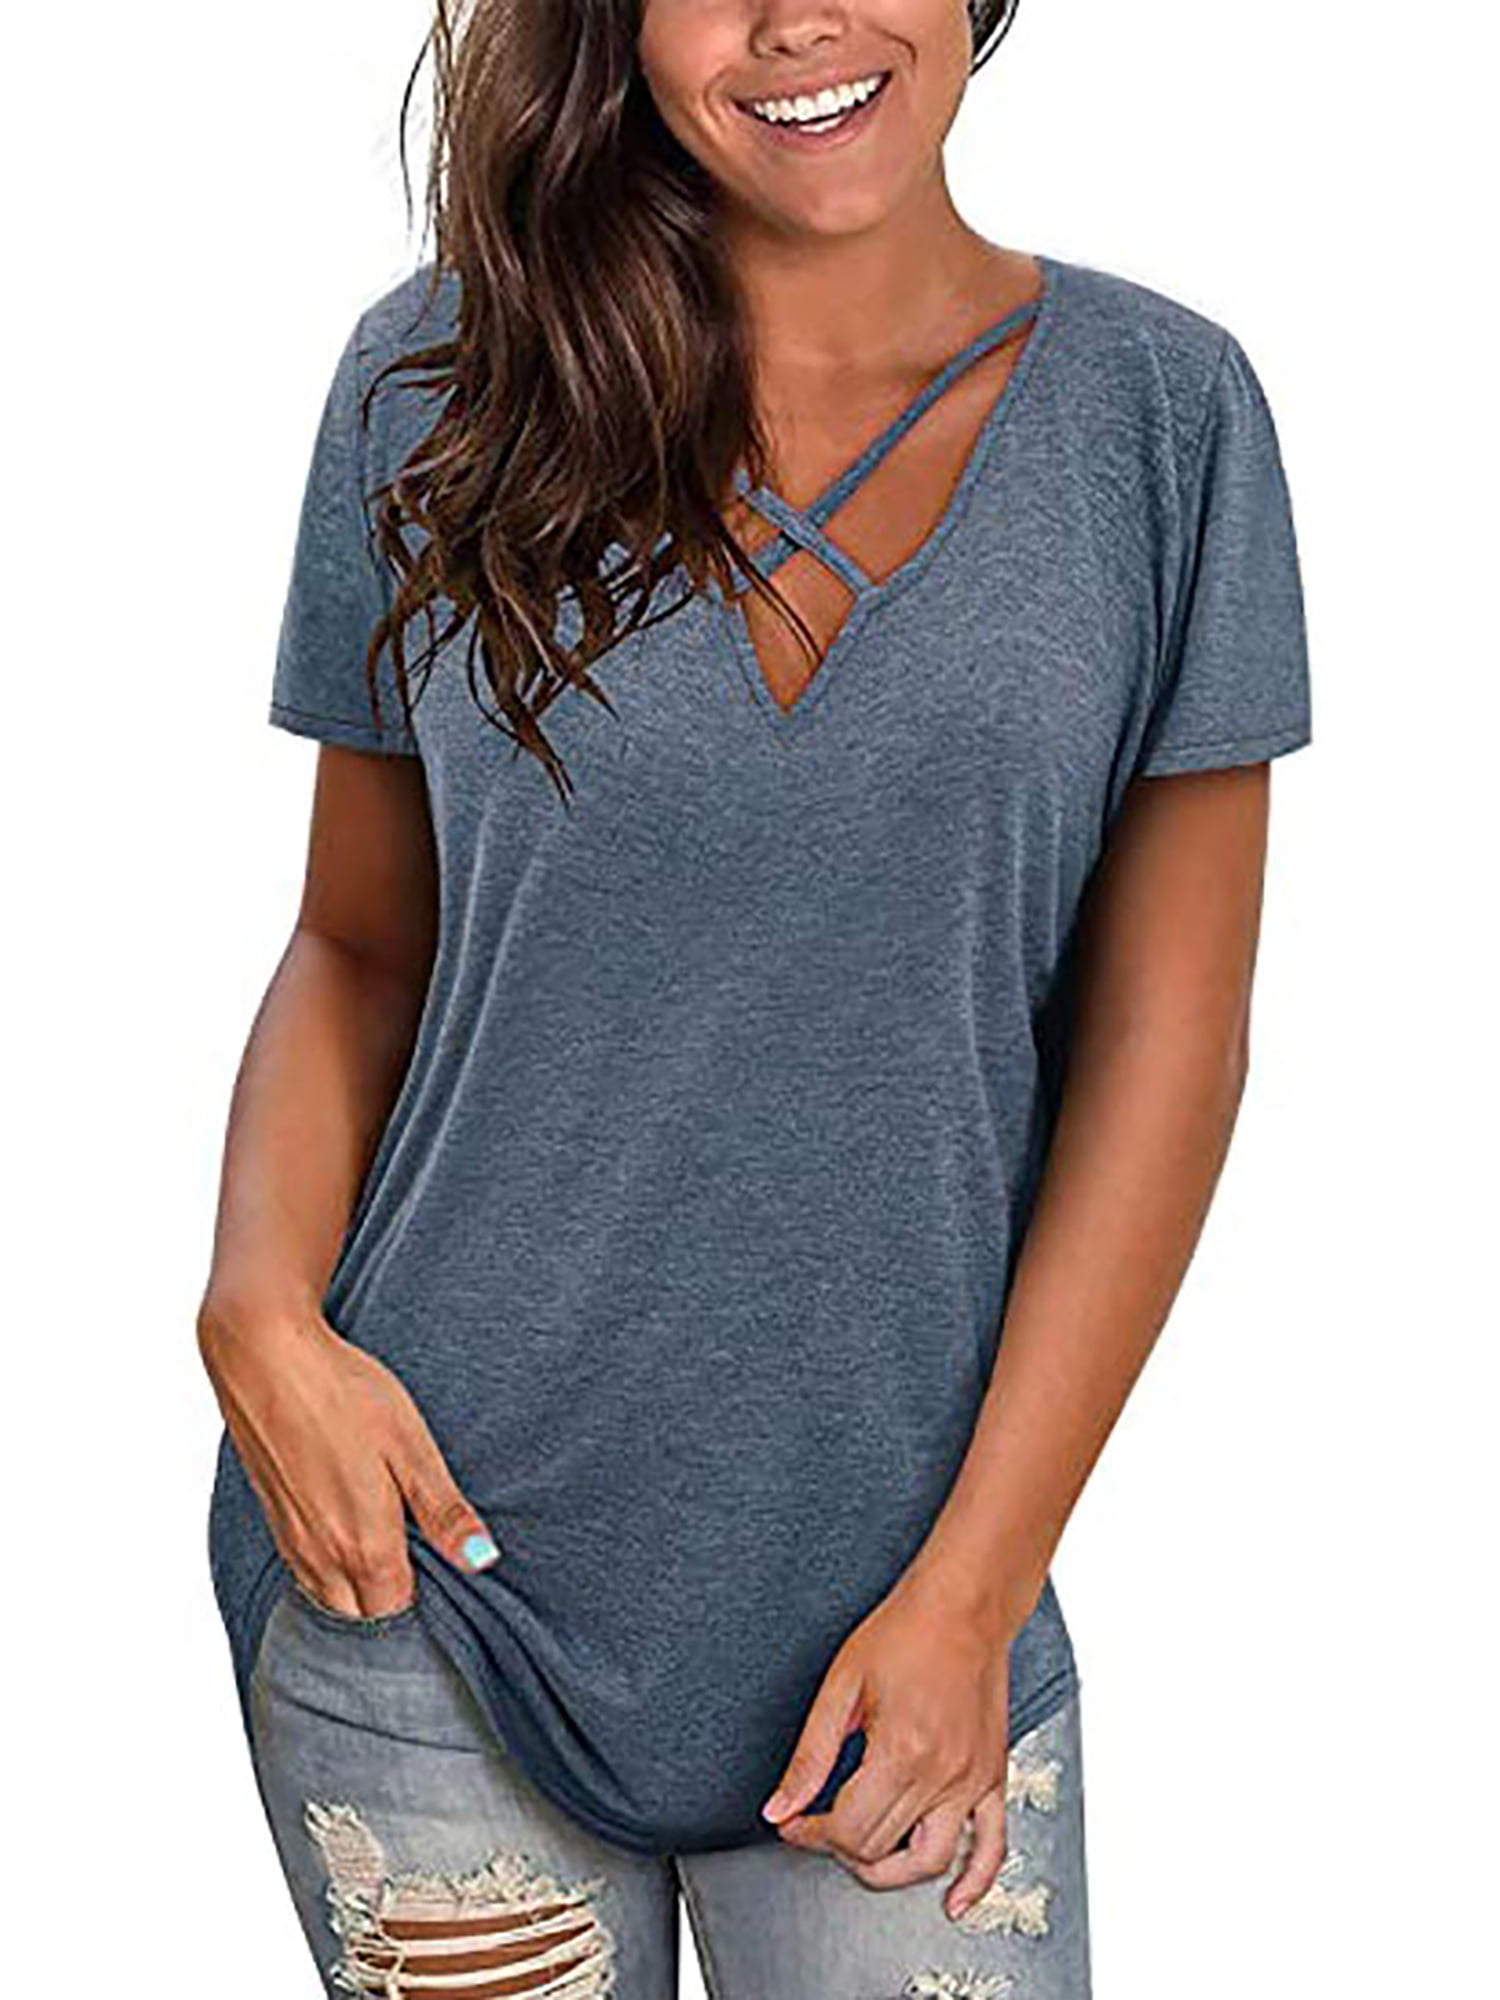 Criss Cross Caged Strappy V-Neck Striped Short Sleeve Tunic T-Shirt Tee Top